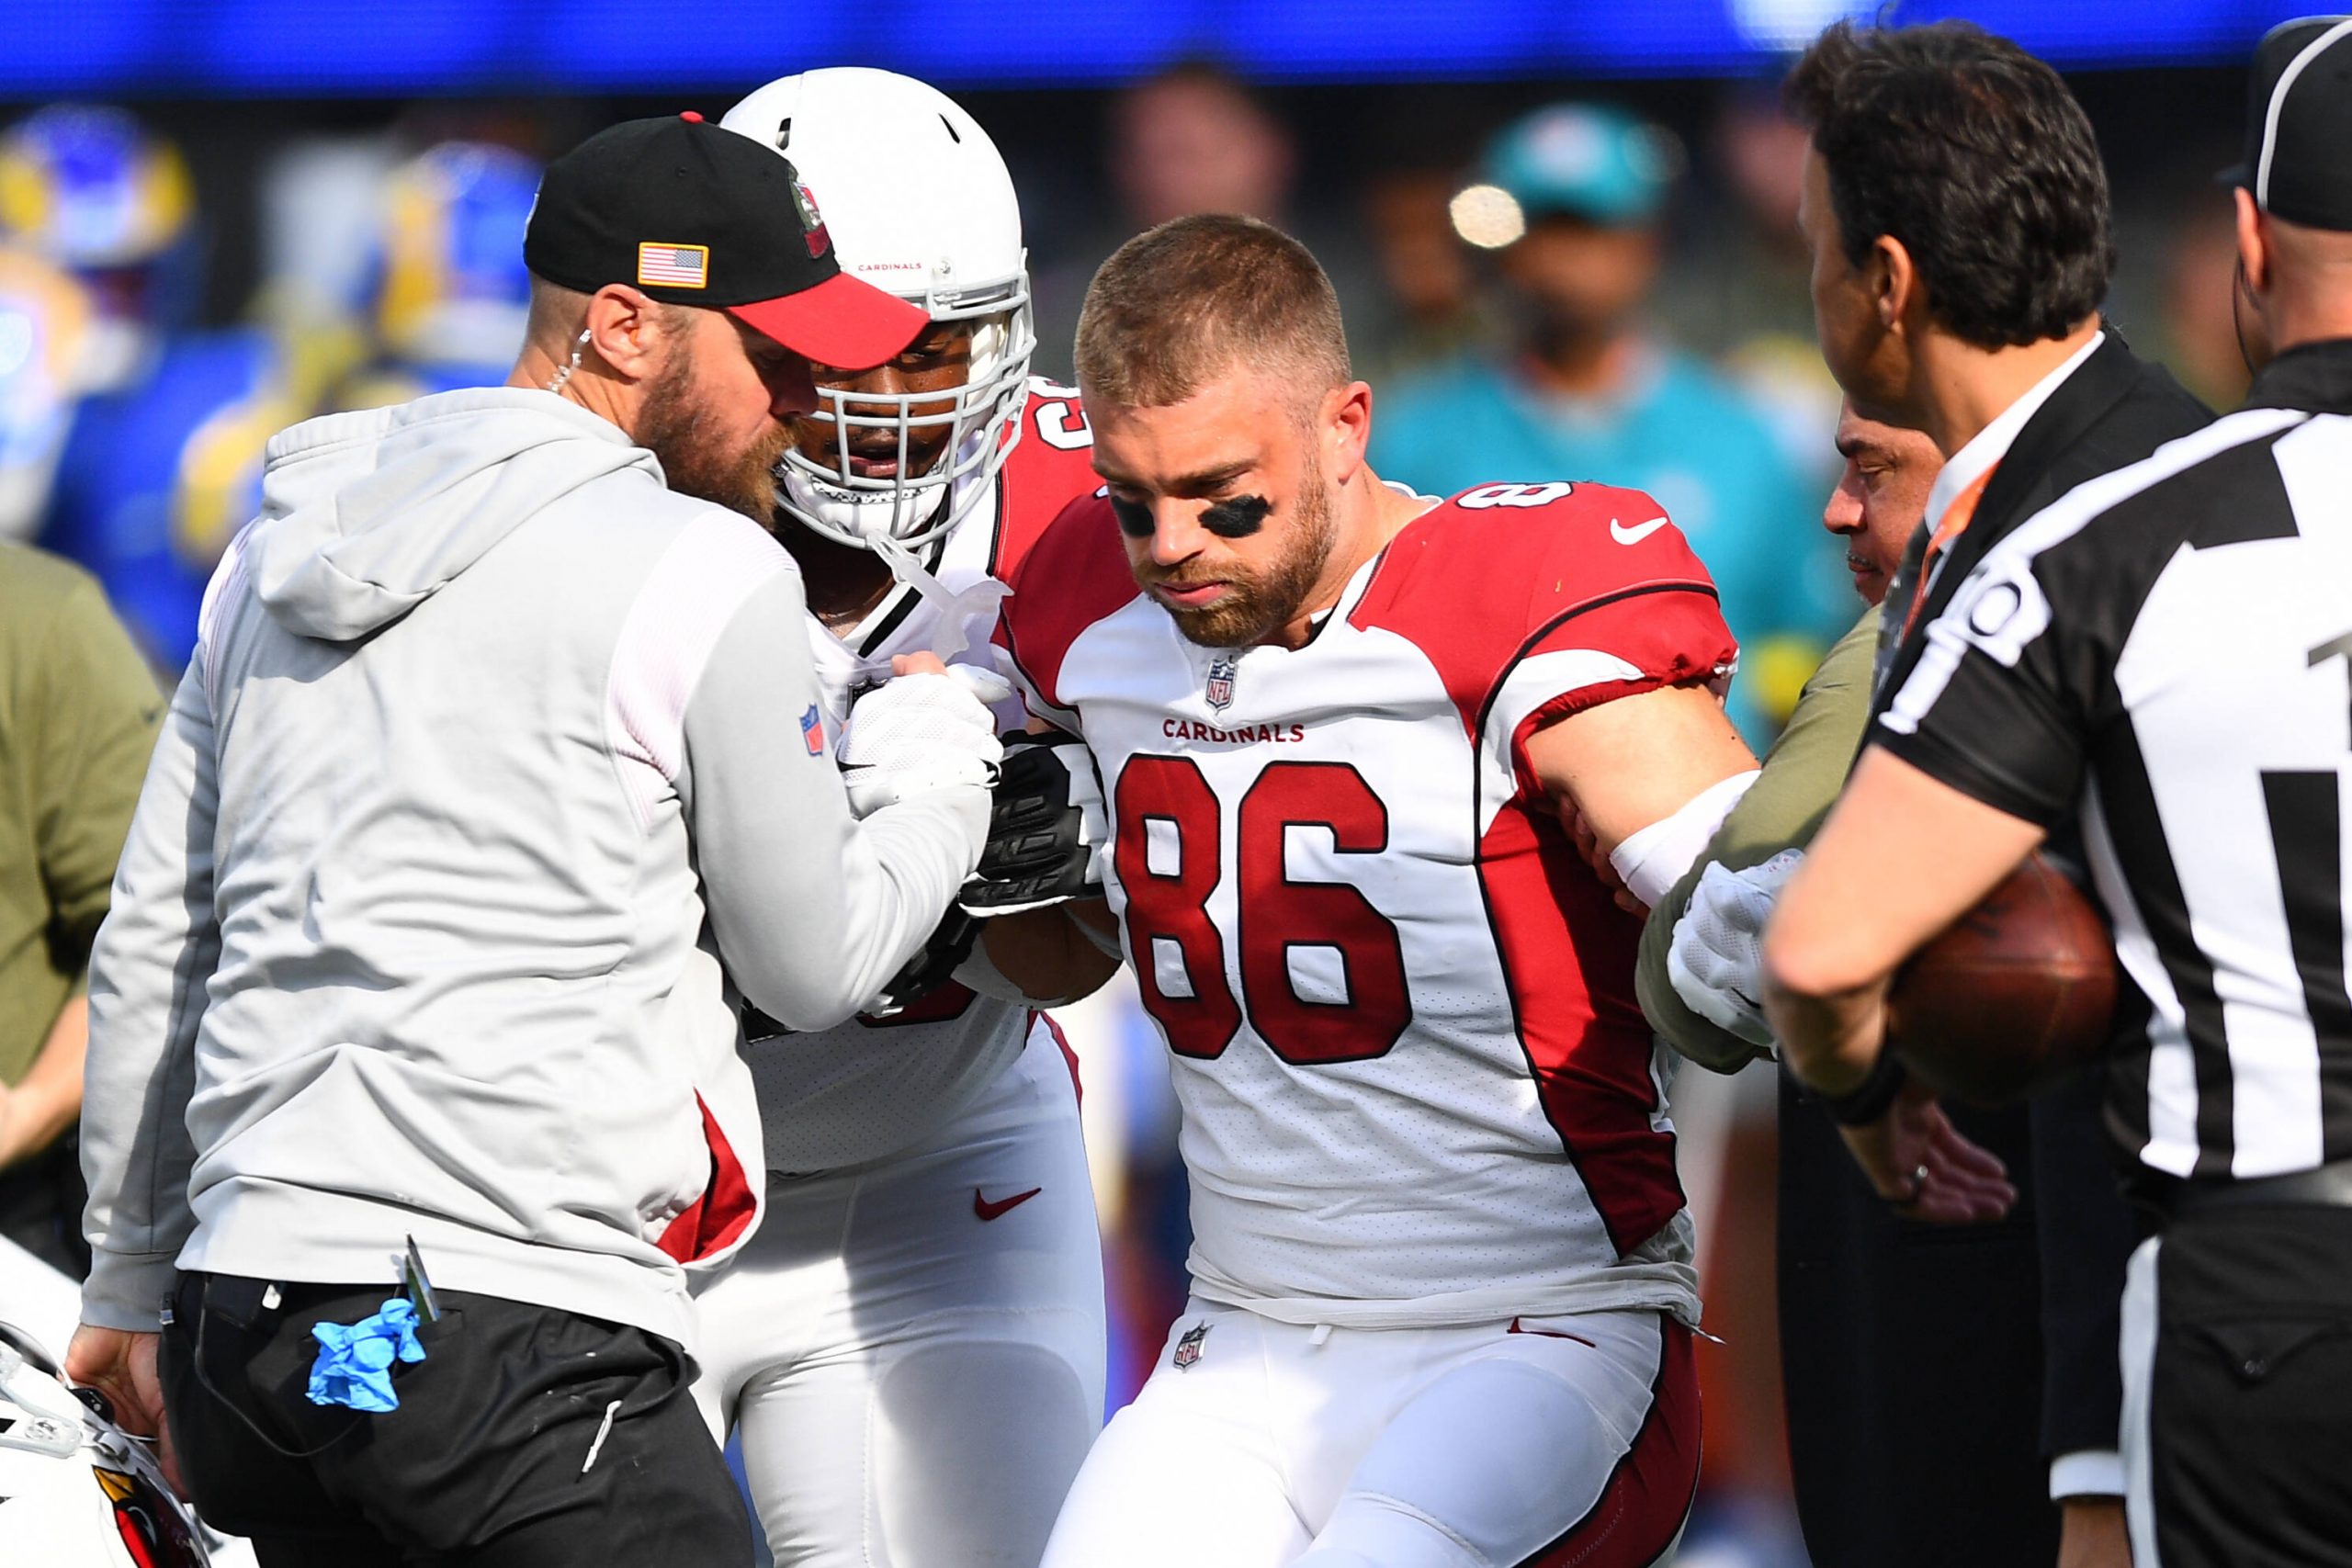 INGLEWOOD, CA - NOVEMBER 13: Arizona Cardinals tight end Zach Ertz 86 is helped off the field after being injured during the NFL, American Football Herren, USA game between the Arizona Cardinals and the Los Angeles Rams on November 13, 2022, at SoFi Stadium in Inglewood, CA. Photo by Brian Rothmuller/Icon Sportswire NFL: NOV 13 Cardinals at Rams Icon221113021